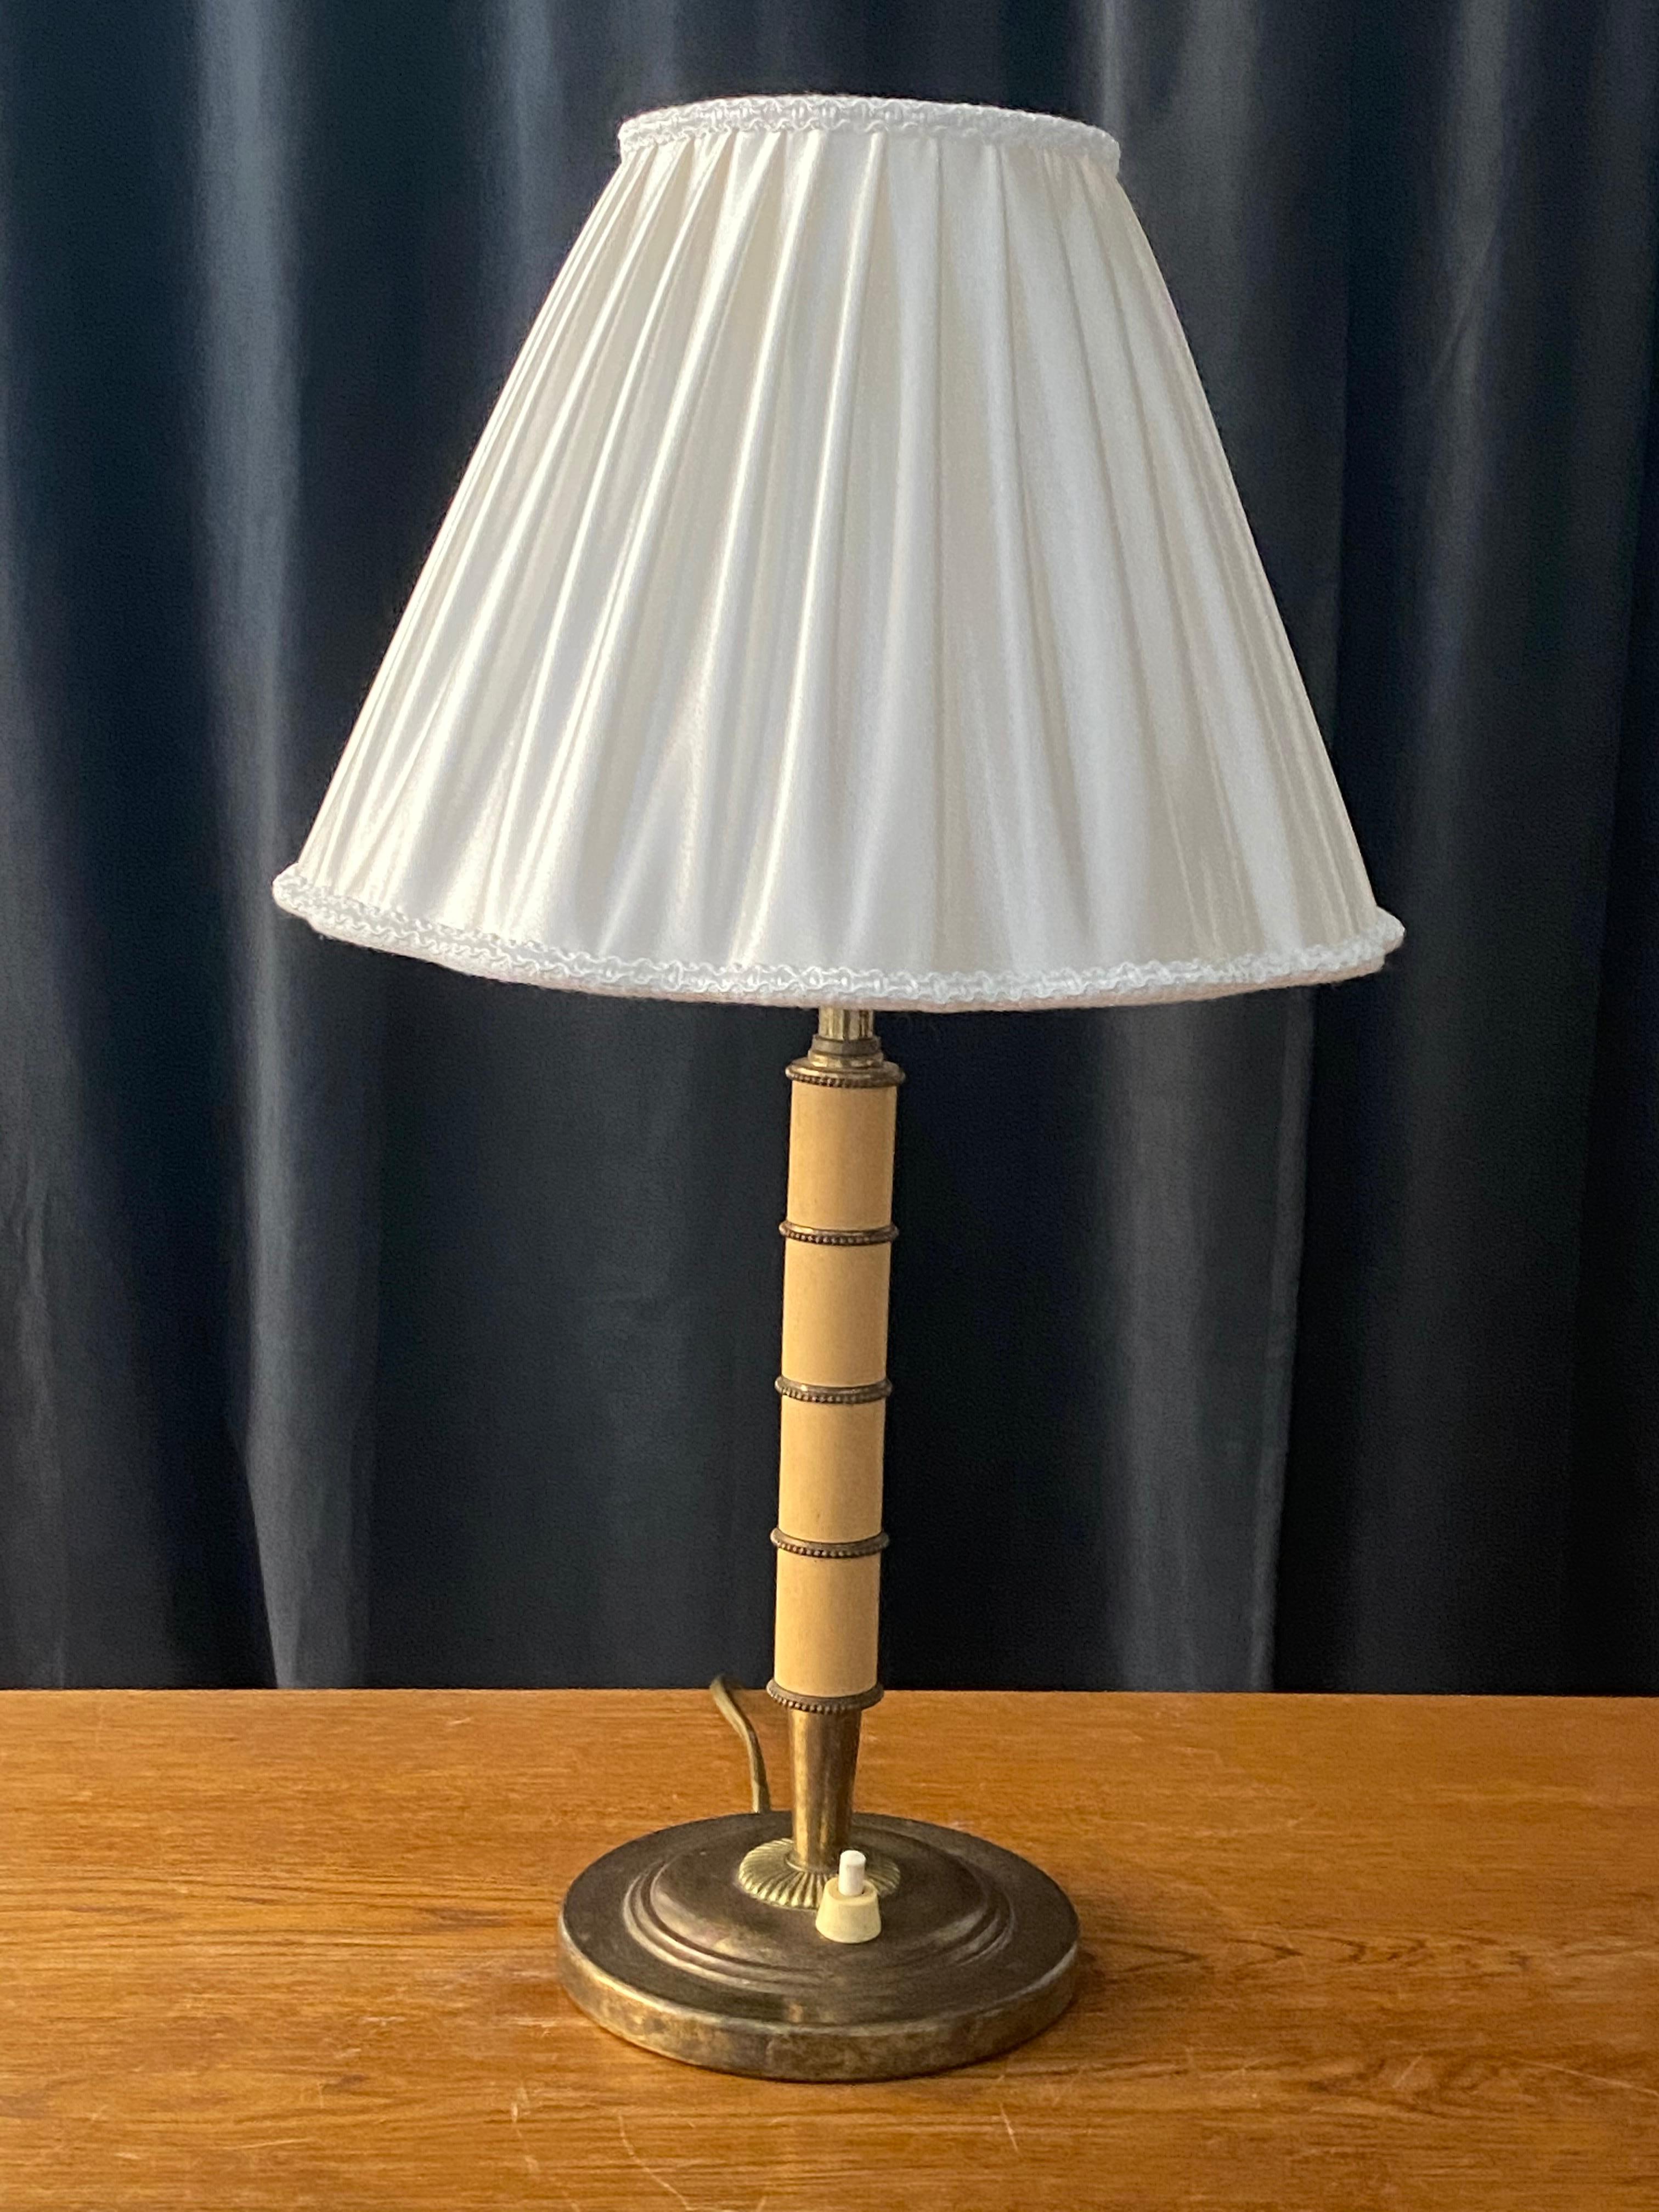 A table lamp, designed and produced in Sweden, 1930s. With lively original patina. With a brand new high-end lampshade produced in Sweden

Other designers of the period include Josef Frank, Estrid Ericsson, Just Andersen, and Kaare Klint.
  